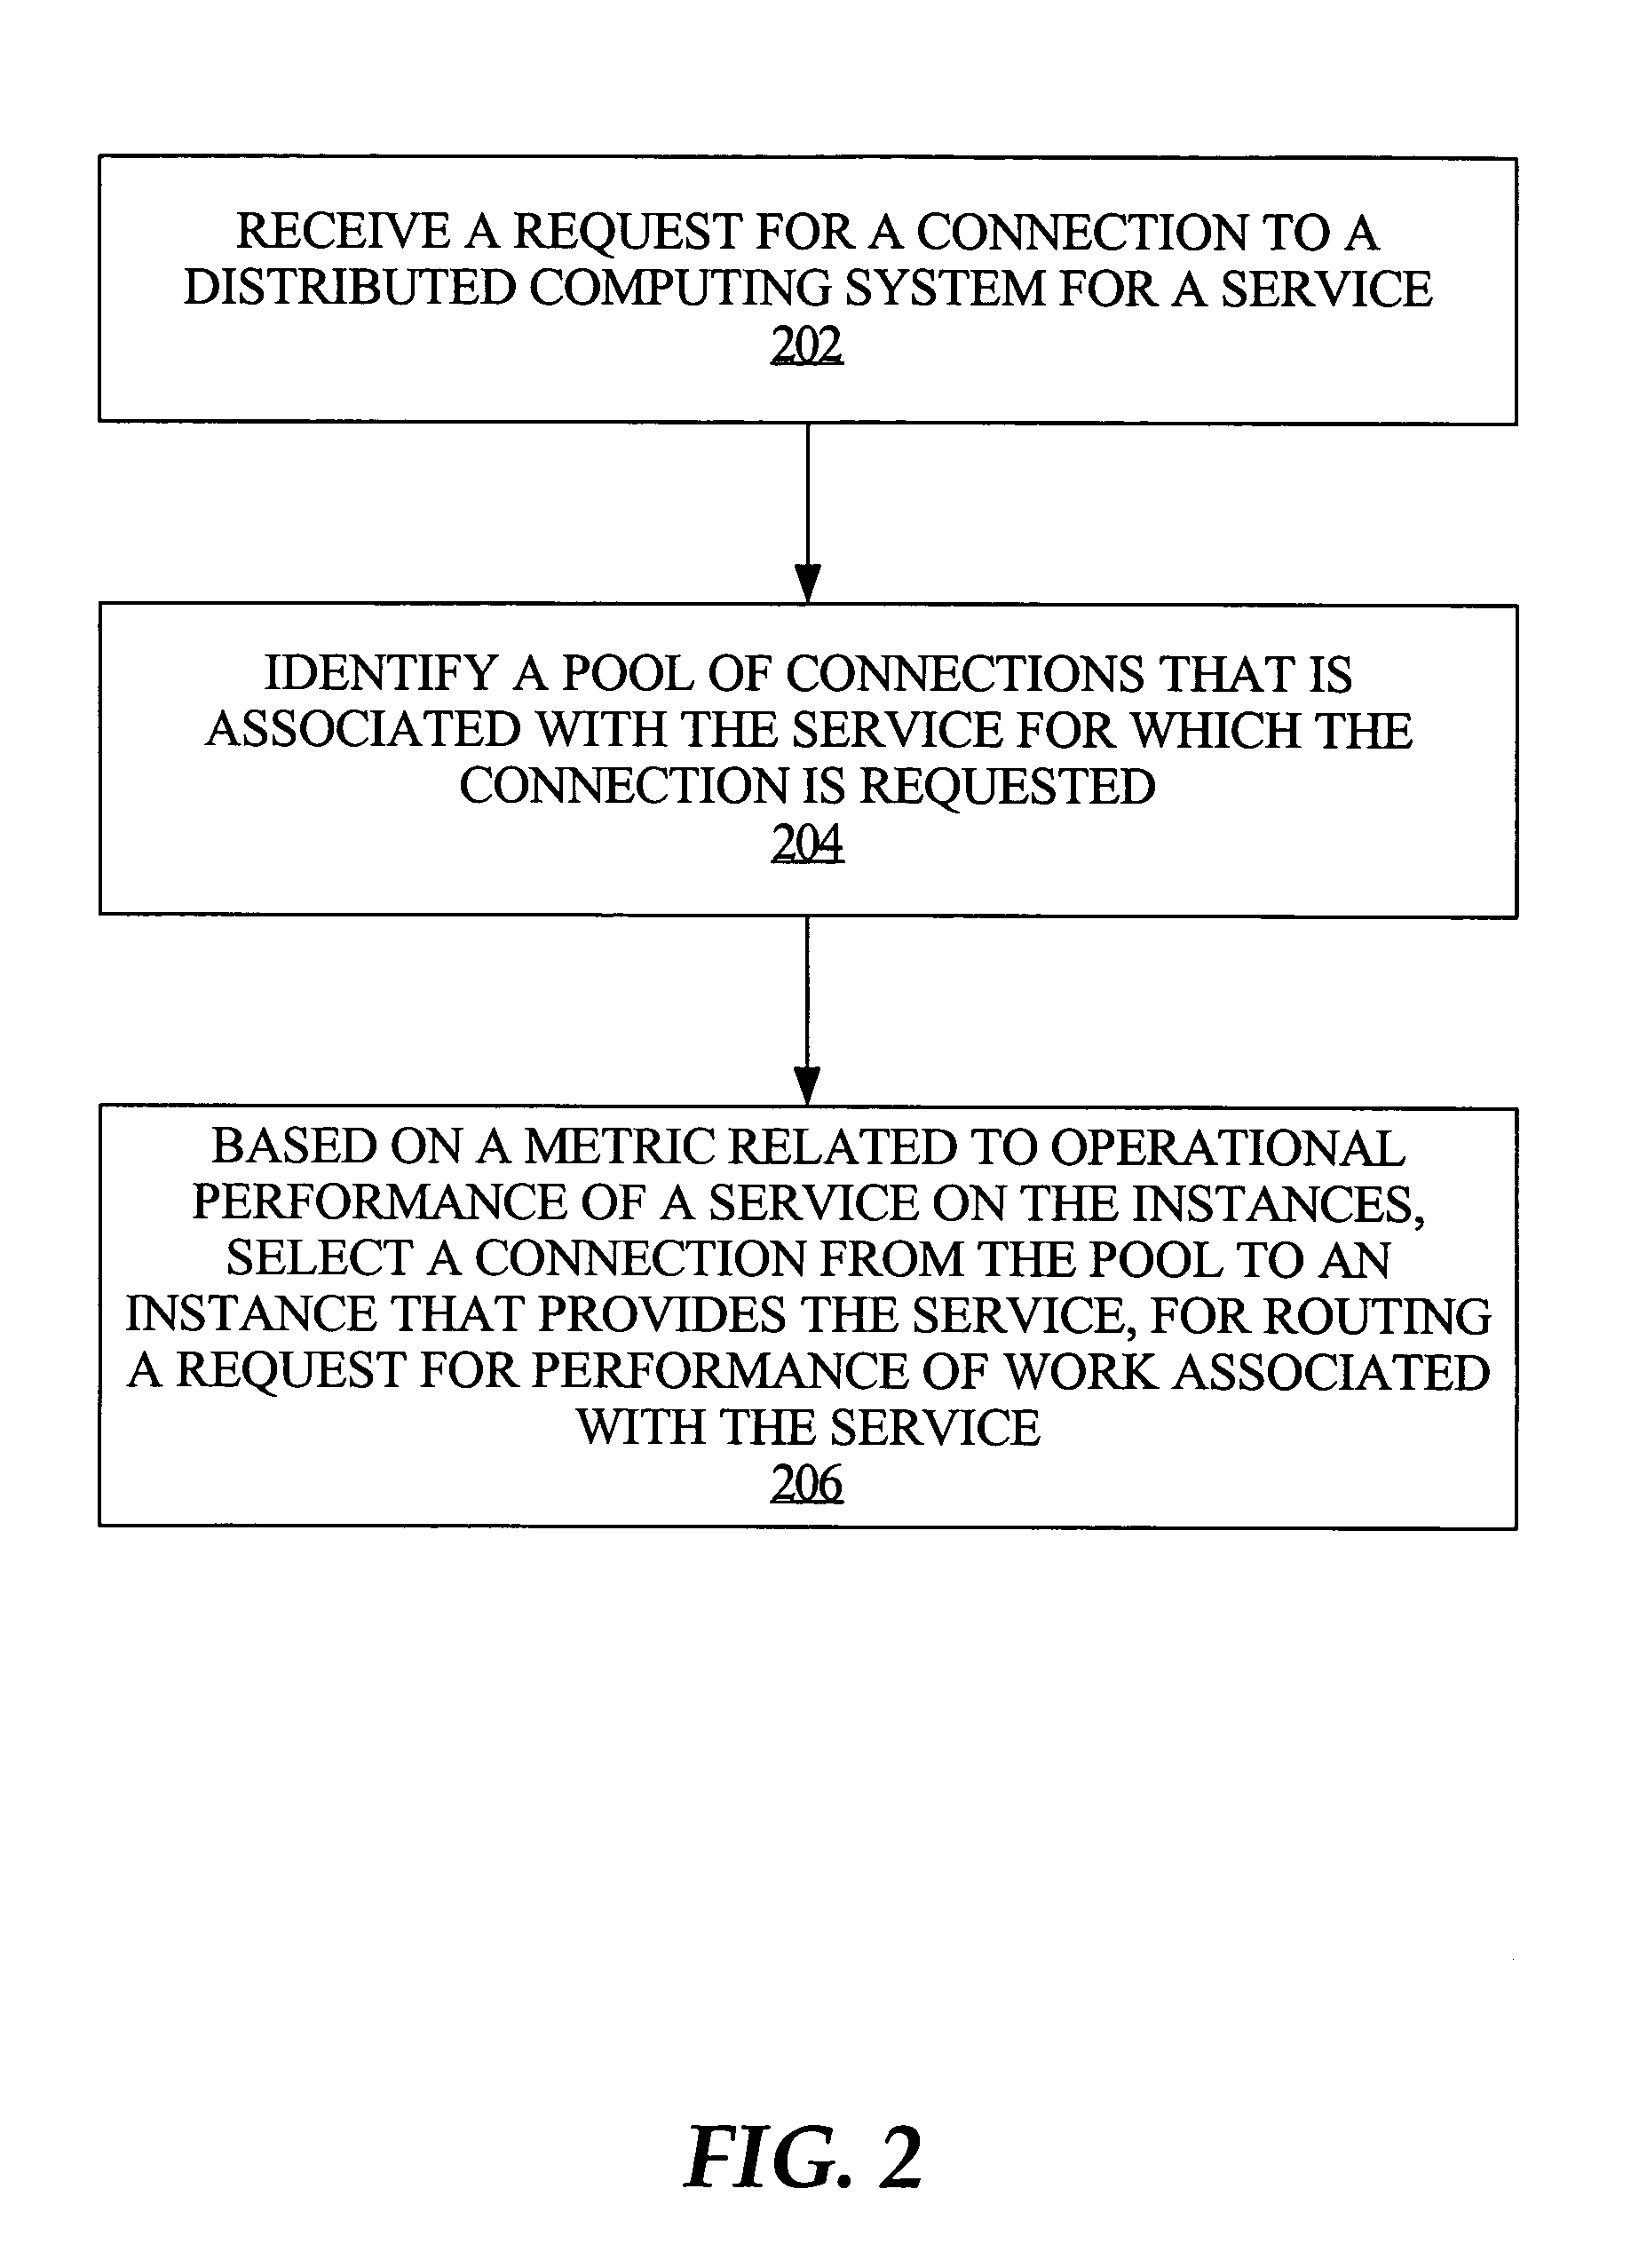 Connection pool use of runtime load balancing service performance advisories